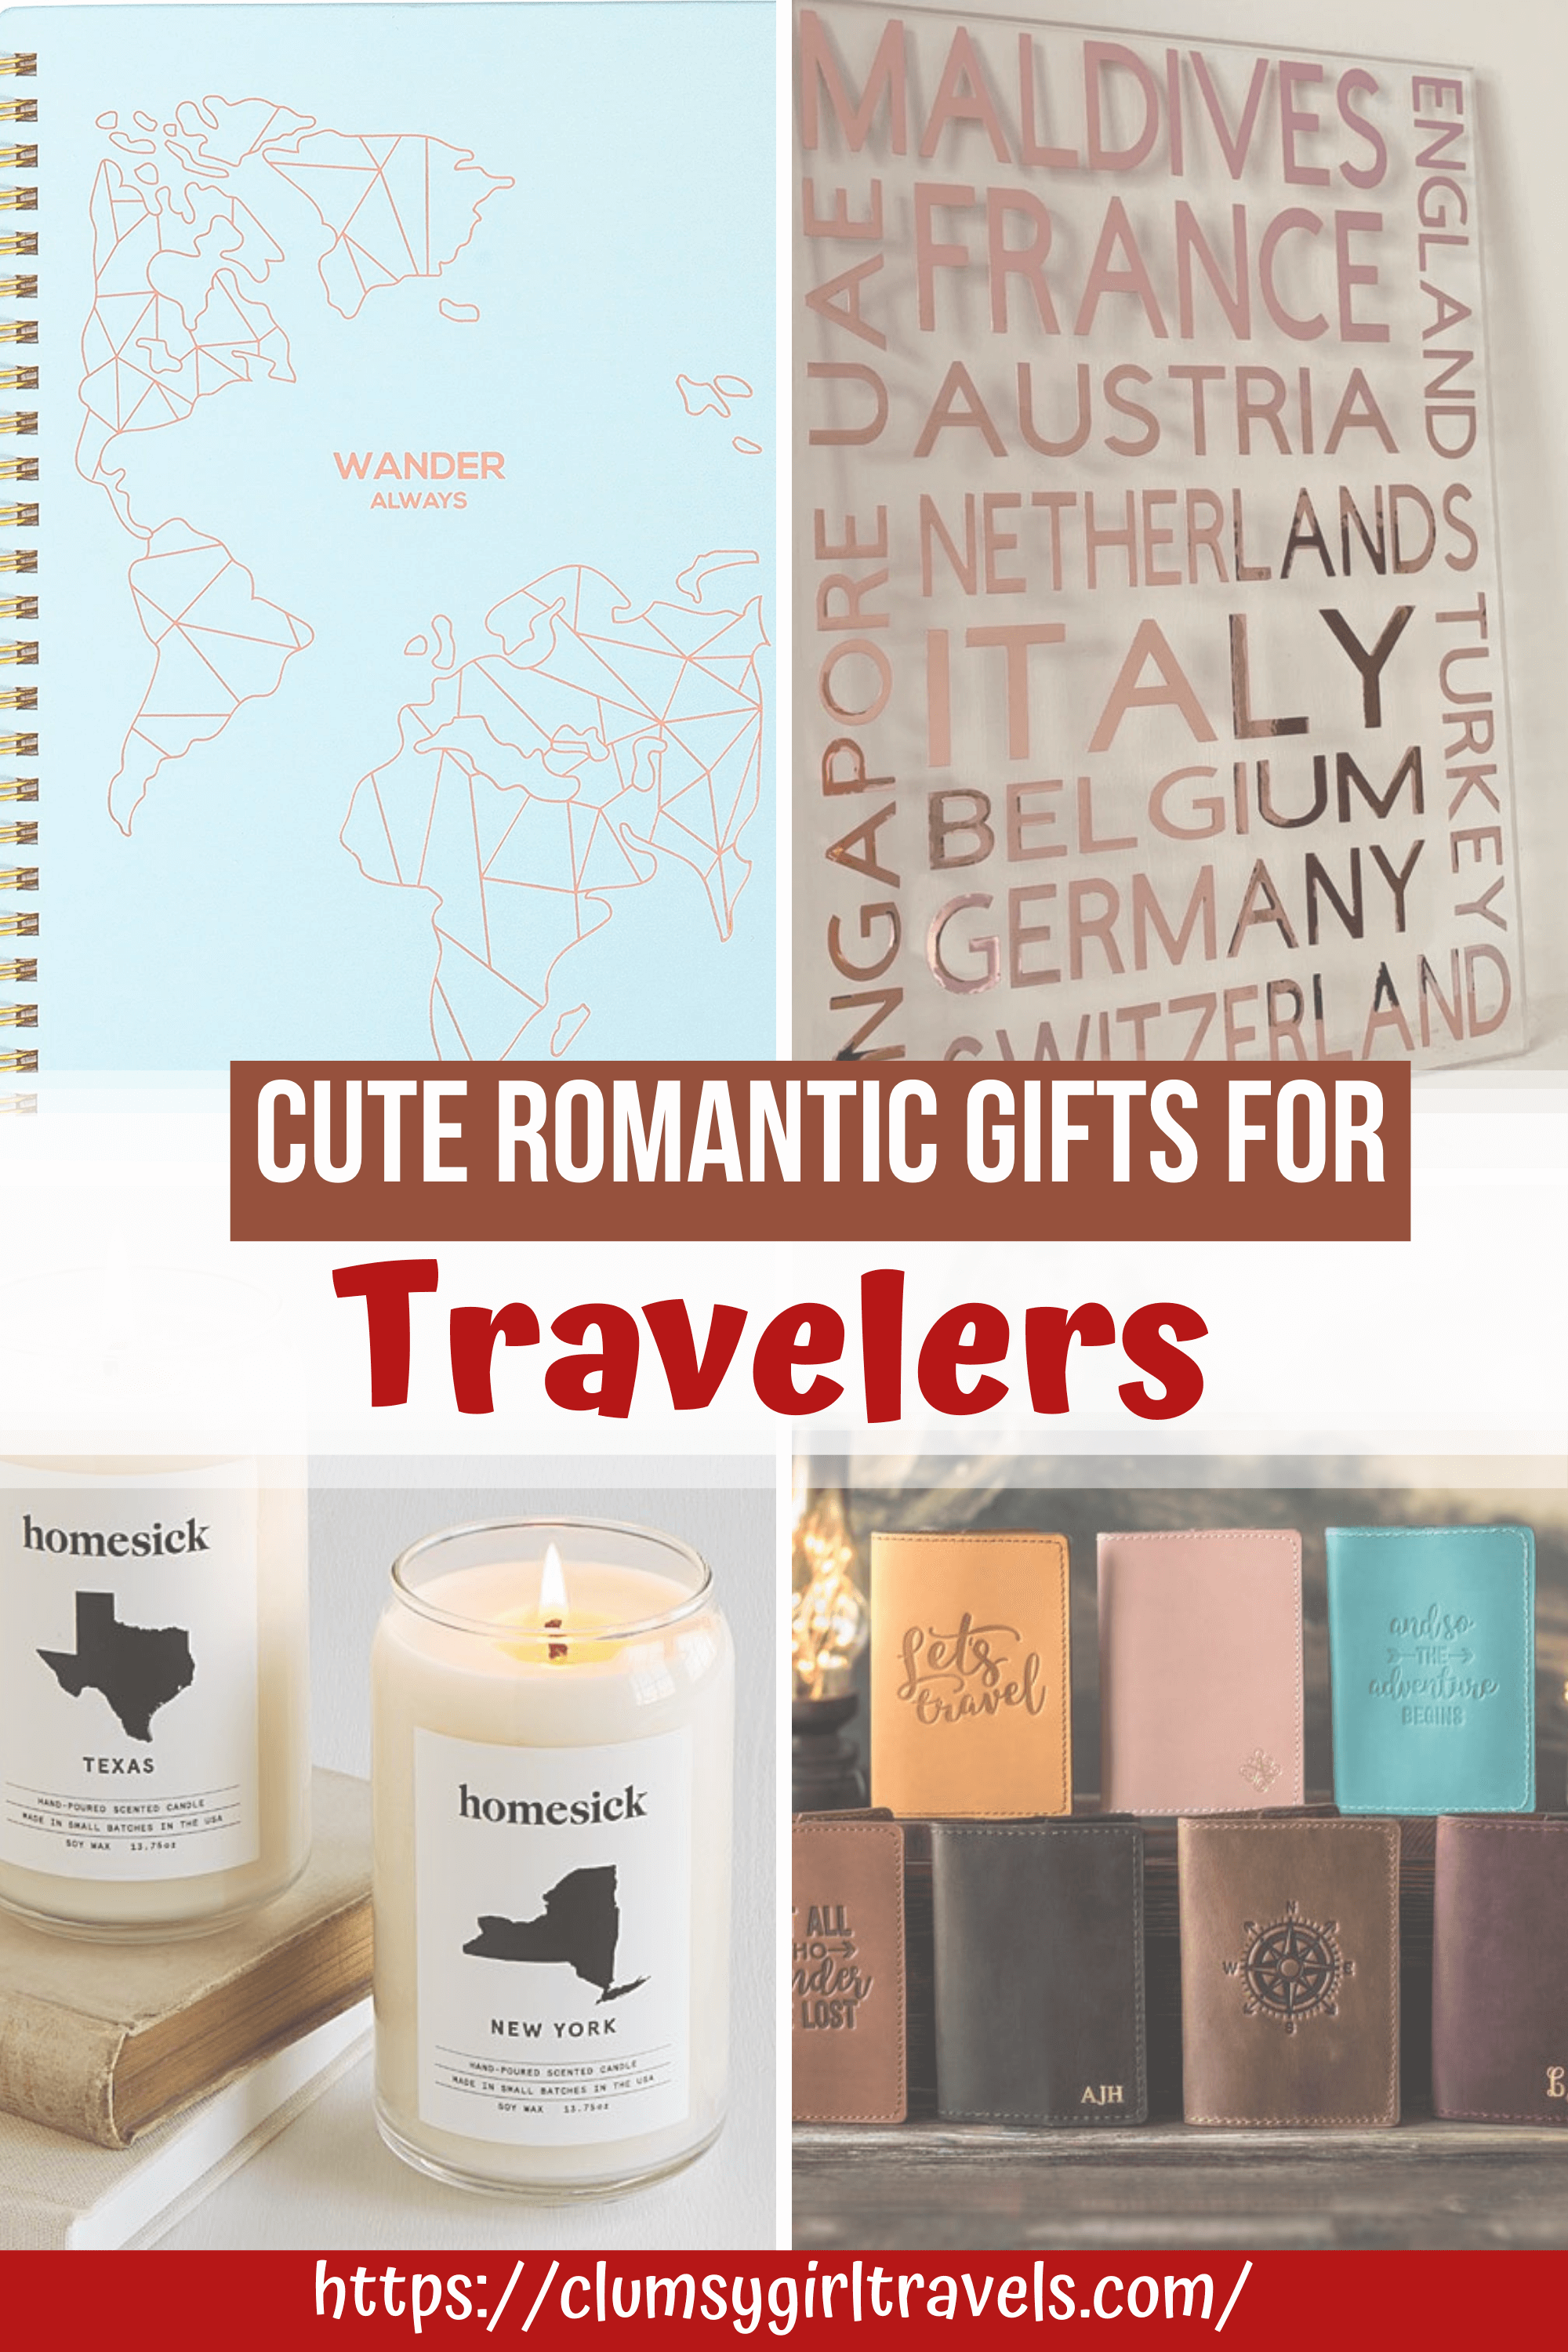 Get the perfect gift for your significant other with these valentines day gifts for travelers. You won't have to wonder what to buy.